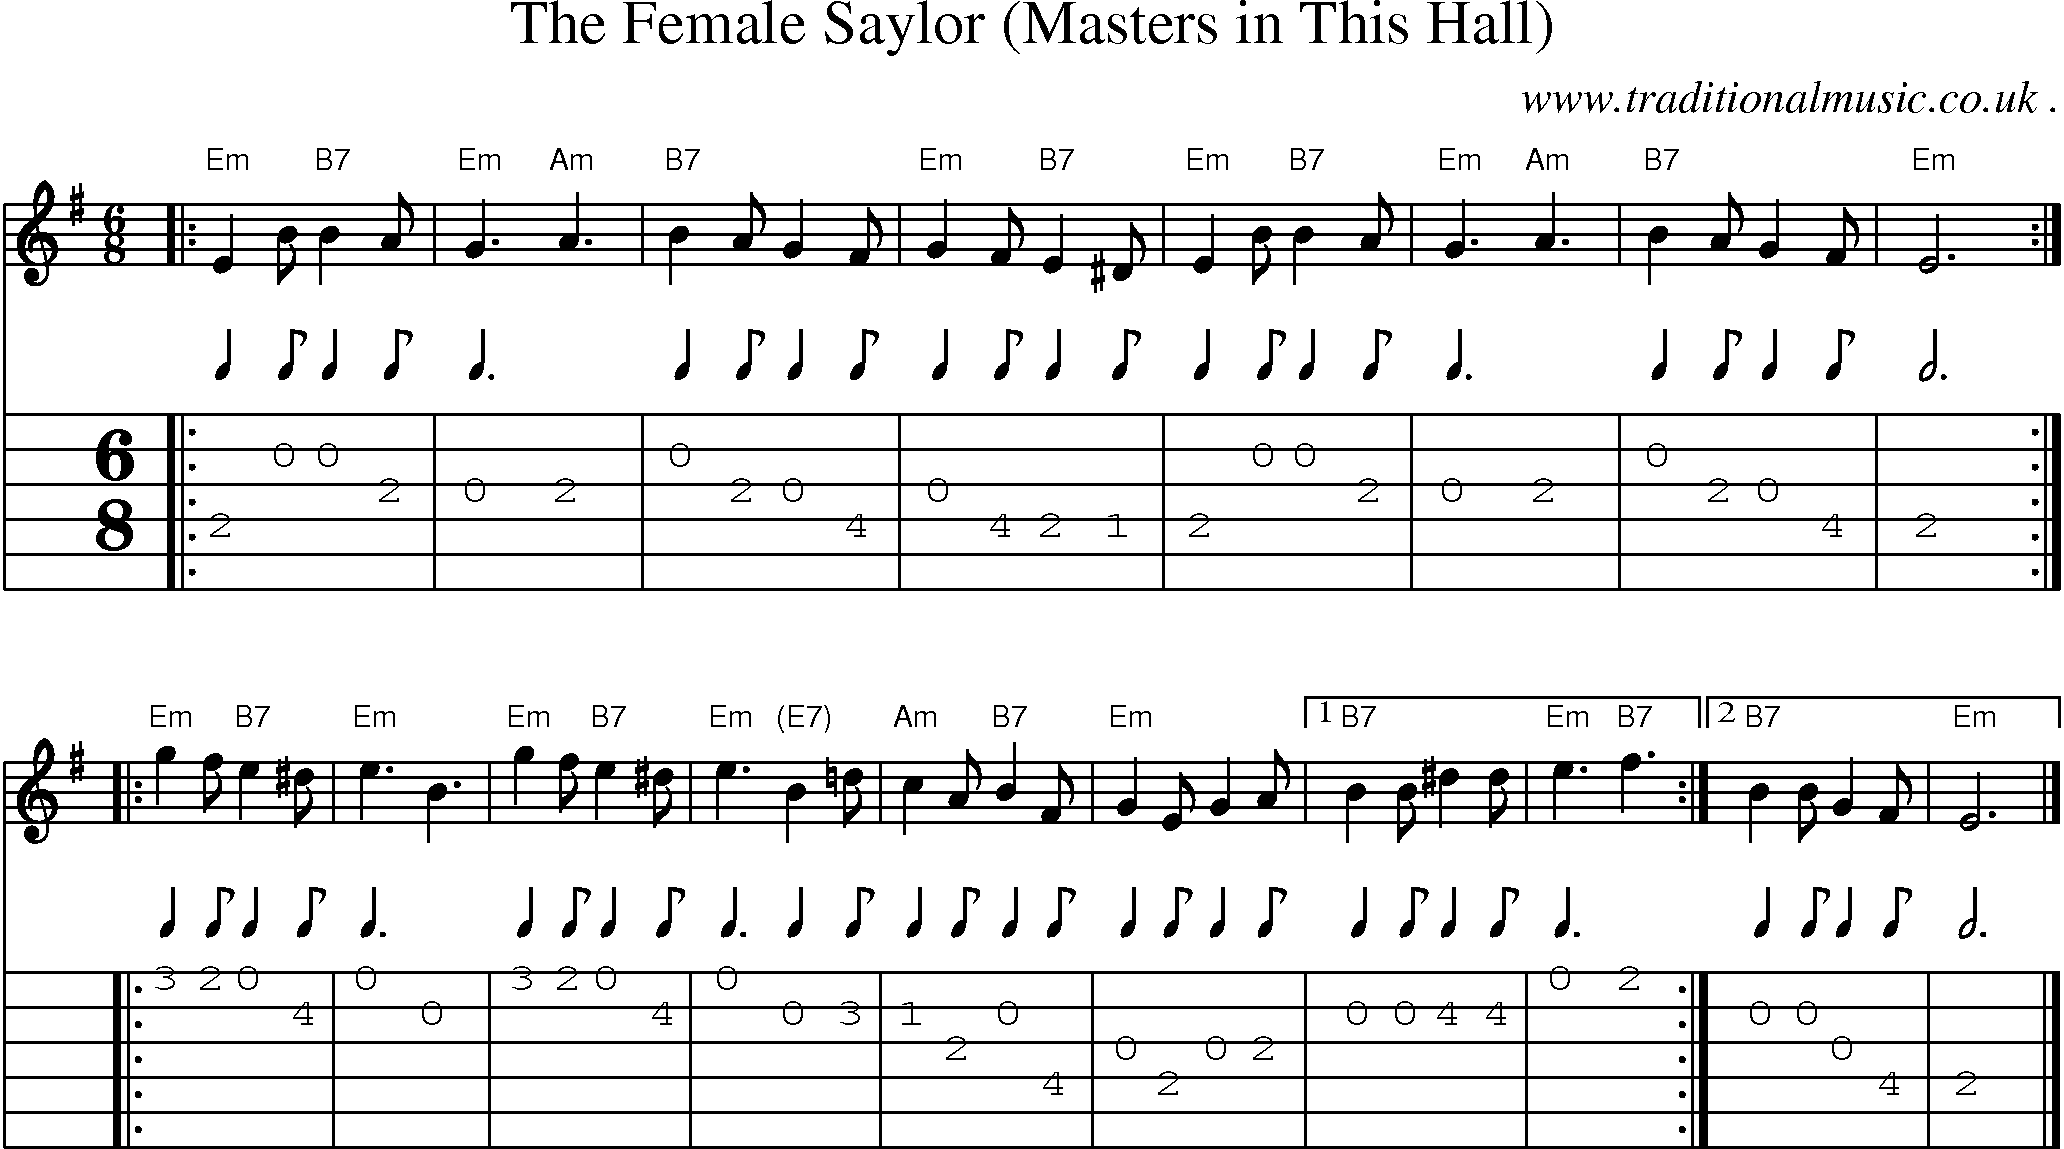 Sheet-music  score, Chords and Guitar Tabs for The Female Saylor Masters In This Hall